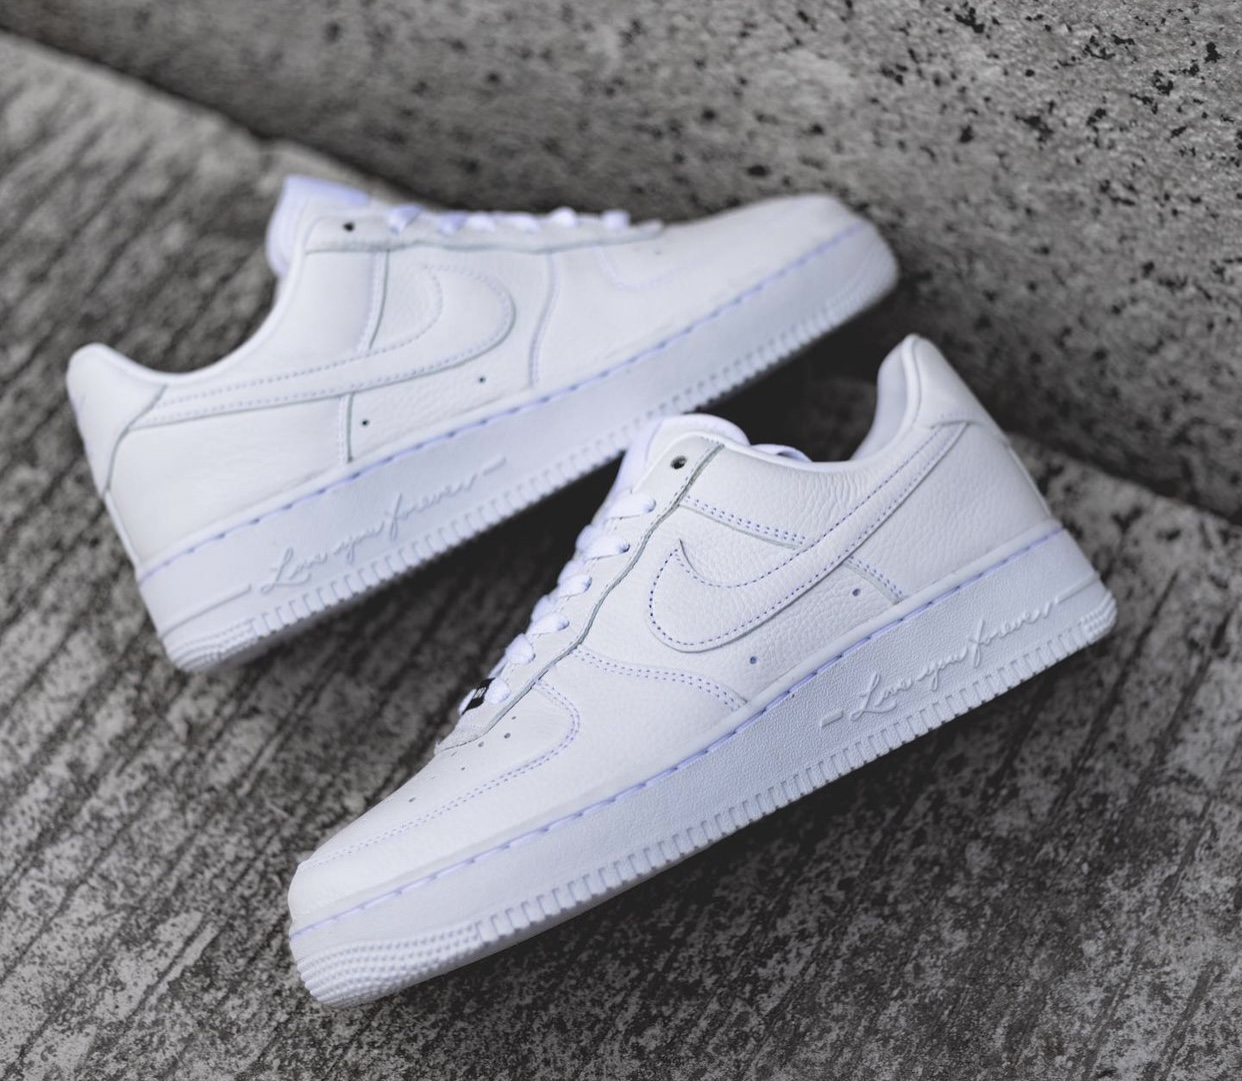 Drake NOCTA Nike Air Force 1 Certified Lover Boy White Release Date Info